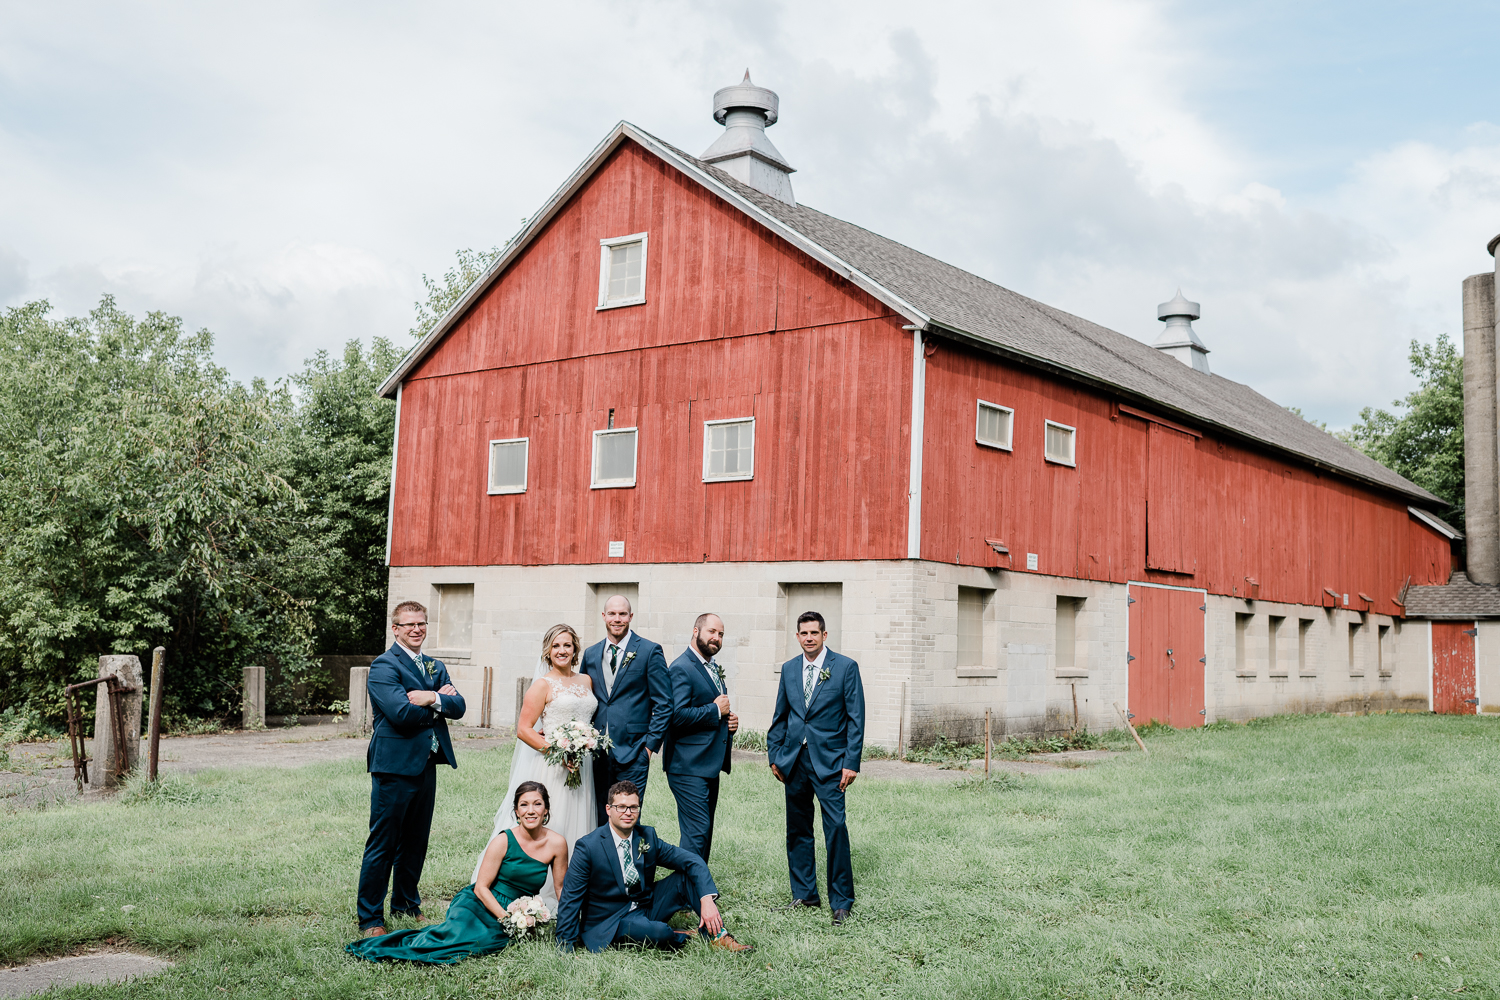 Bridal party outside the red barn